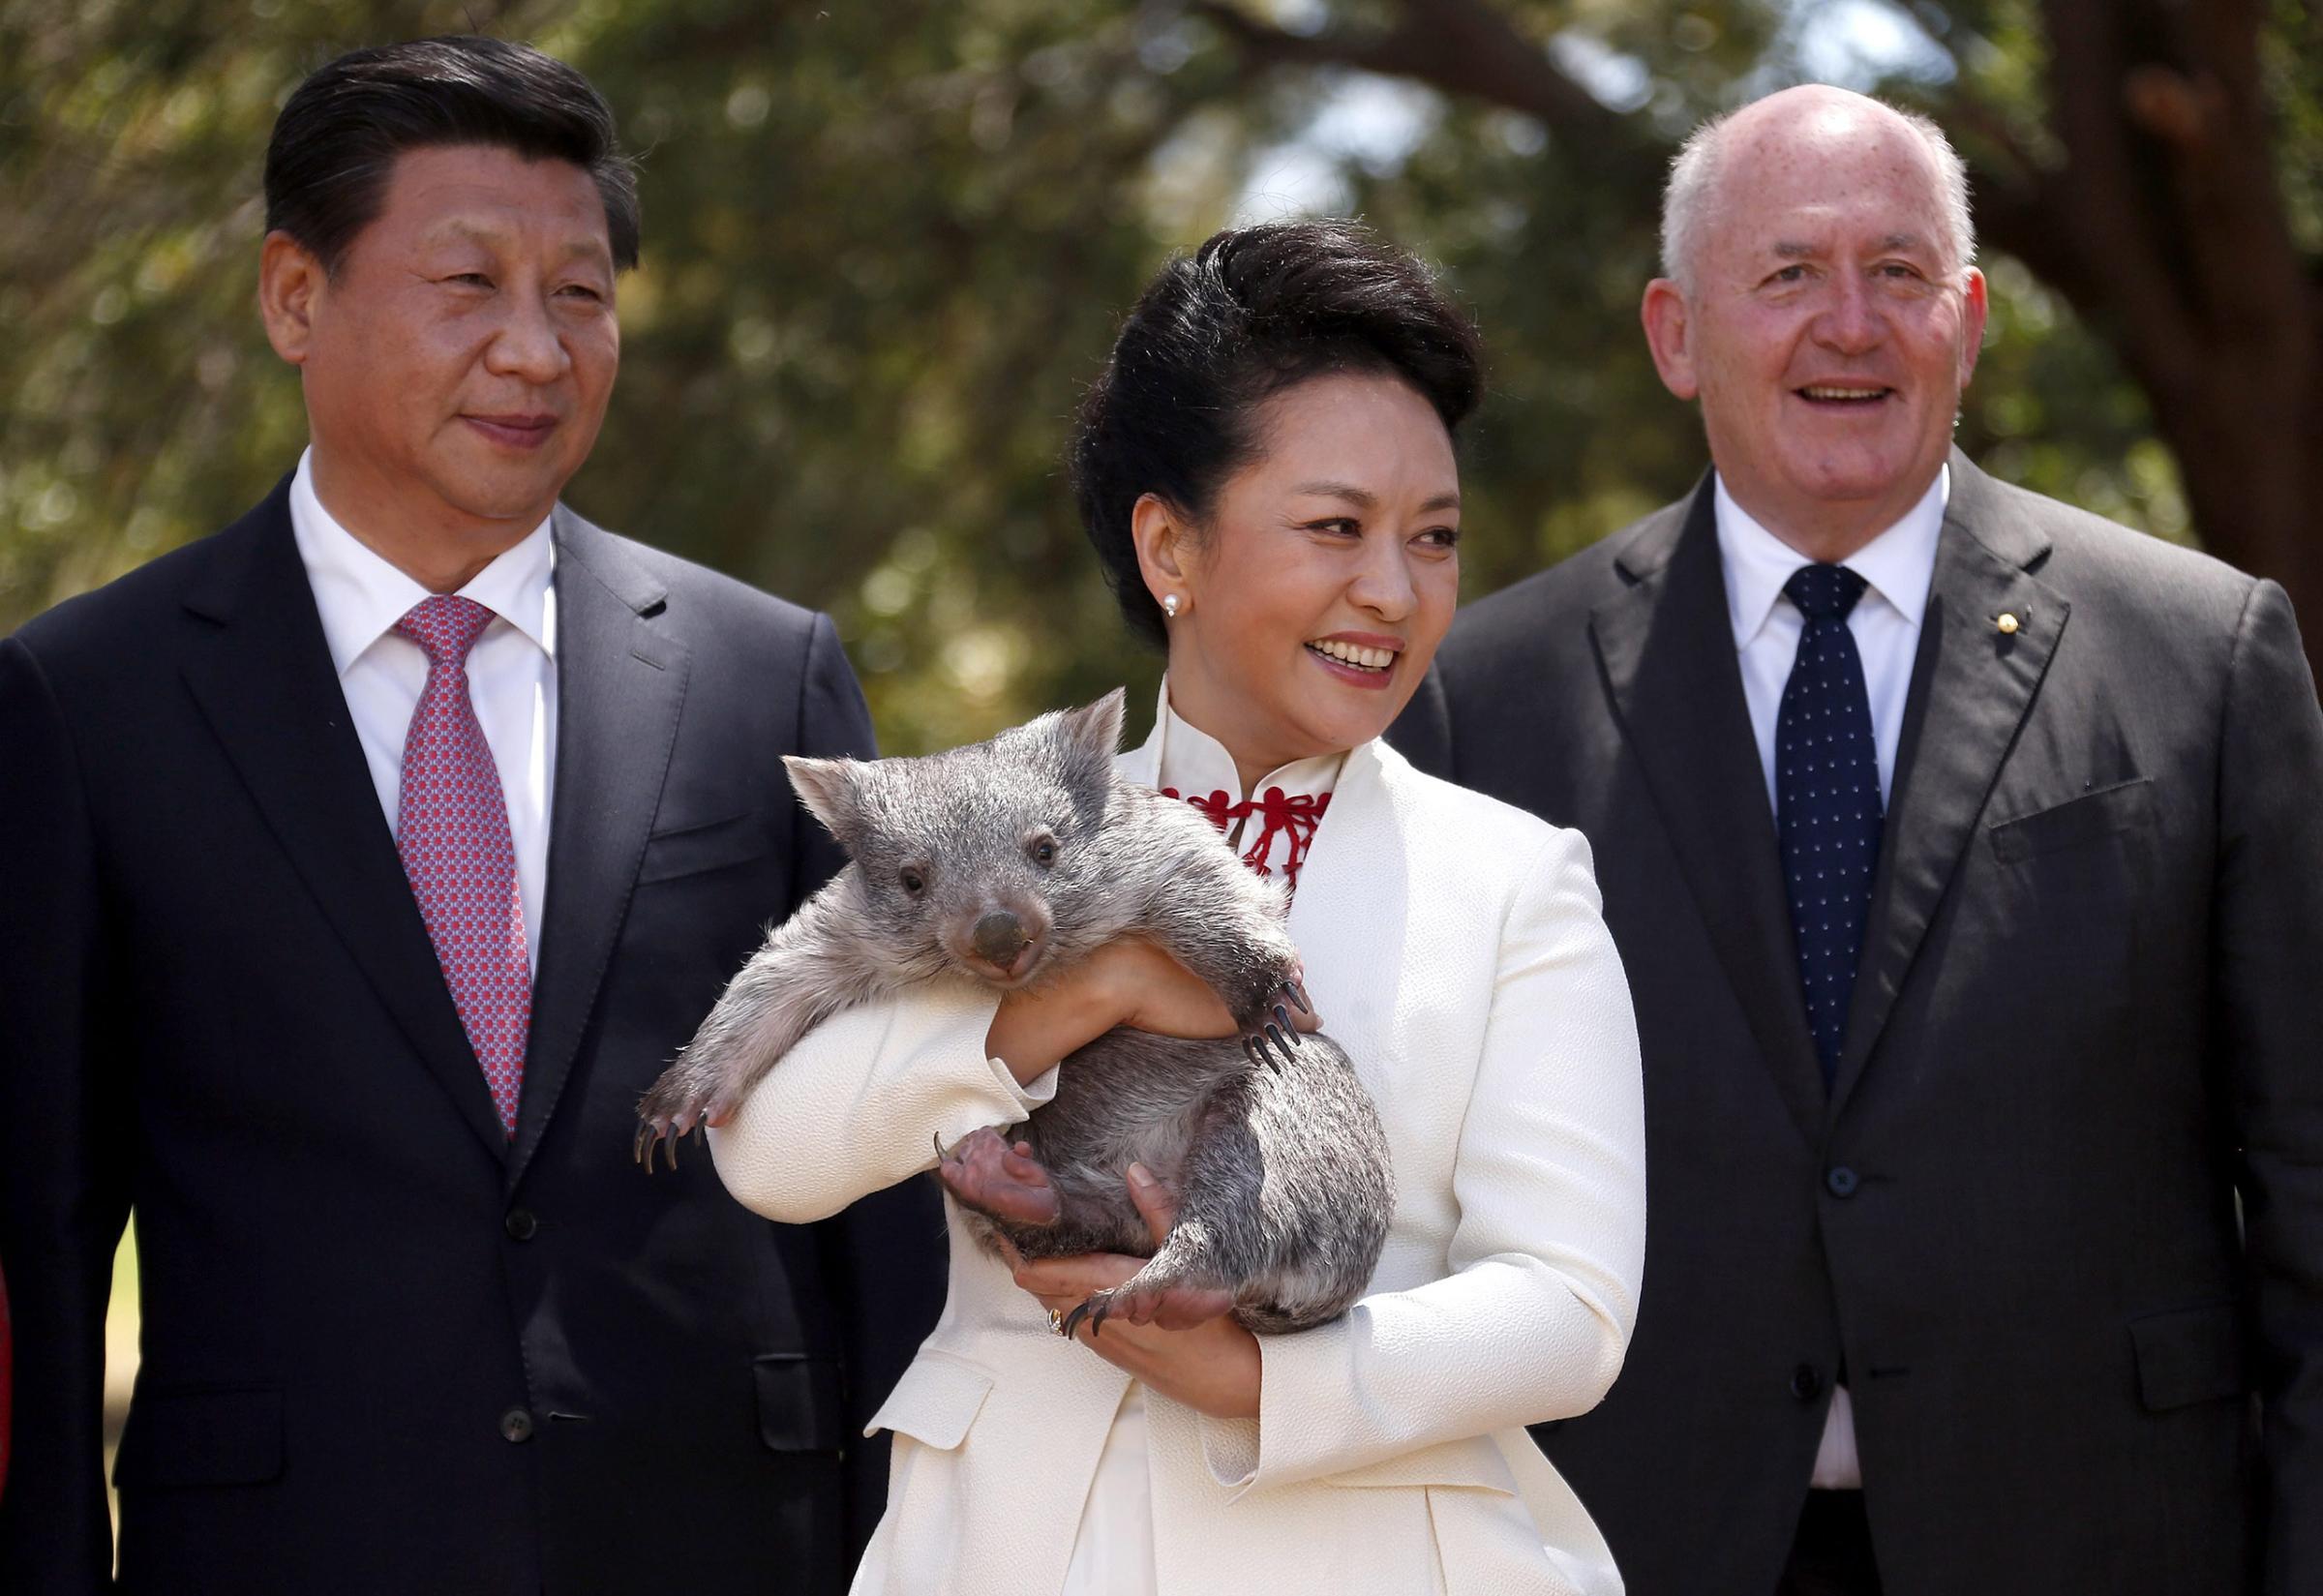 Chinese President Xi Jinping visit in Canberra